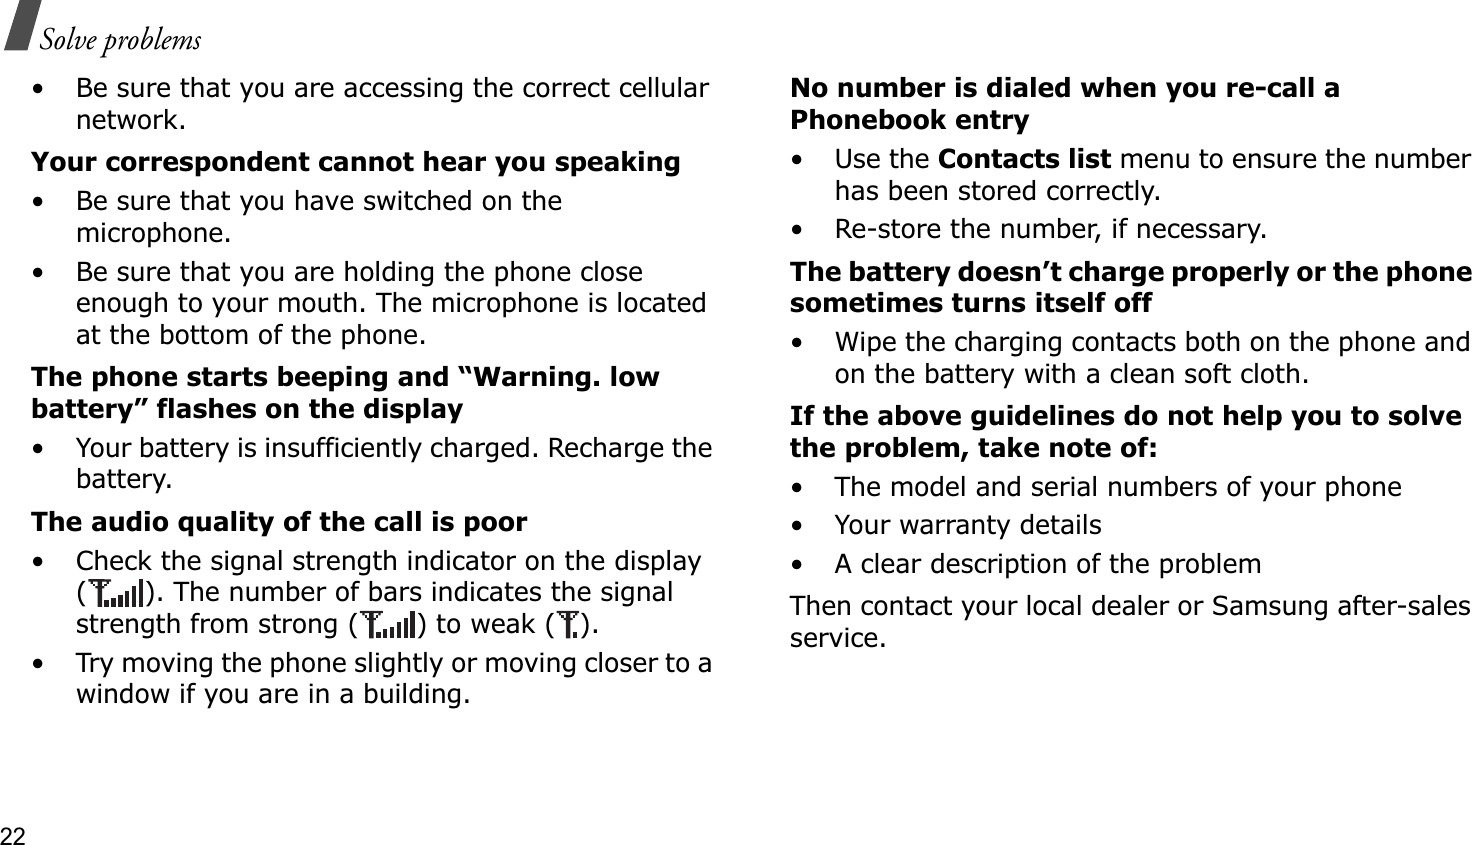 22Solve problems• Be sure that you are accessing the correct cellular network.Your correspondent cannot hear you speaking• Be sure that you have switched on the microphone.• Be sure that you are holding the phone close enough to your mouth. The microphone is located at the bottom of the phone.The phone starts beeping and “Warning. low battery” flashes on the display• Your battery is insufficiently charged. Recharge the battery.The audio quality of the call is poor• Check the signal strength indicator on the display ( ). The number of bars indicates the signal strength from strong ( ) to weak ( ).• Try moving the phone slightly or moving closer to a window if you are in a building.No number is dialed when you re-call a Phonebook entry•Use the Contacts list menu to ensure the number has been stored correctly.• Re-store the number, if necessary.The battery doesn’t charge properly or the phone sometimes turns itself off• Wipe the charging contacts both on the phone and on the battery with a clean soft cloth.If the above guidelines do not help you to solve the problem, take note of:• The model and serial numbers of your phone•Your warranty details• A clear description of the problemThen contact your local dealer or Samsung after-sales service.